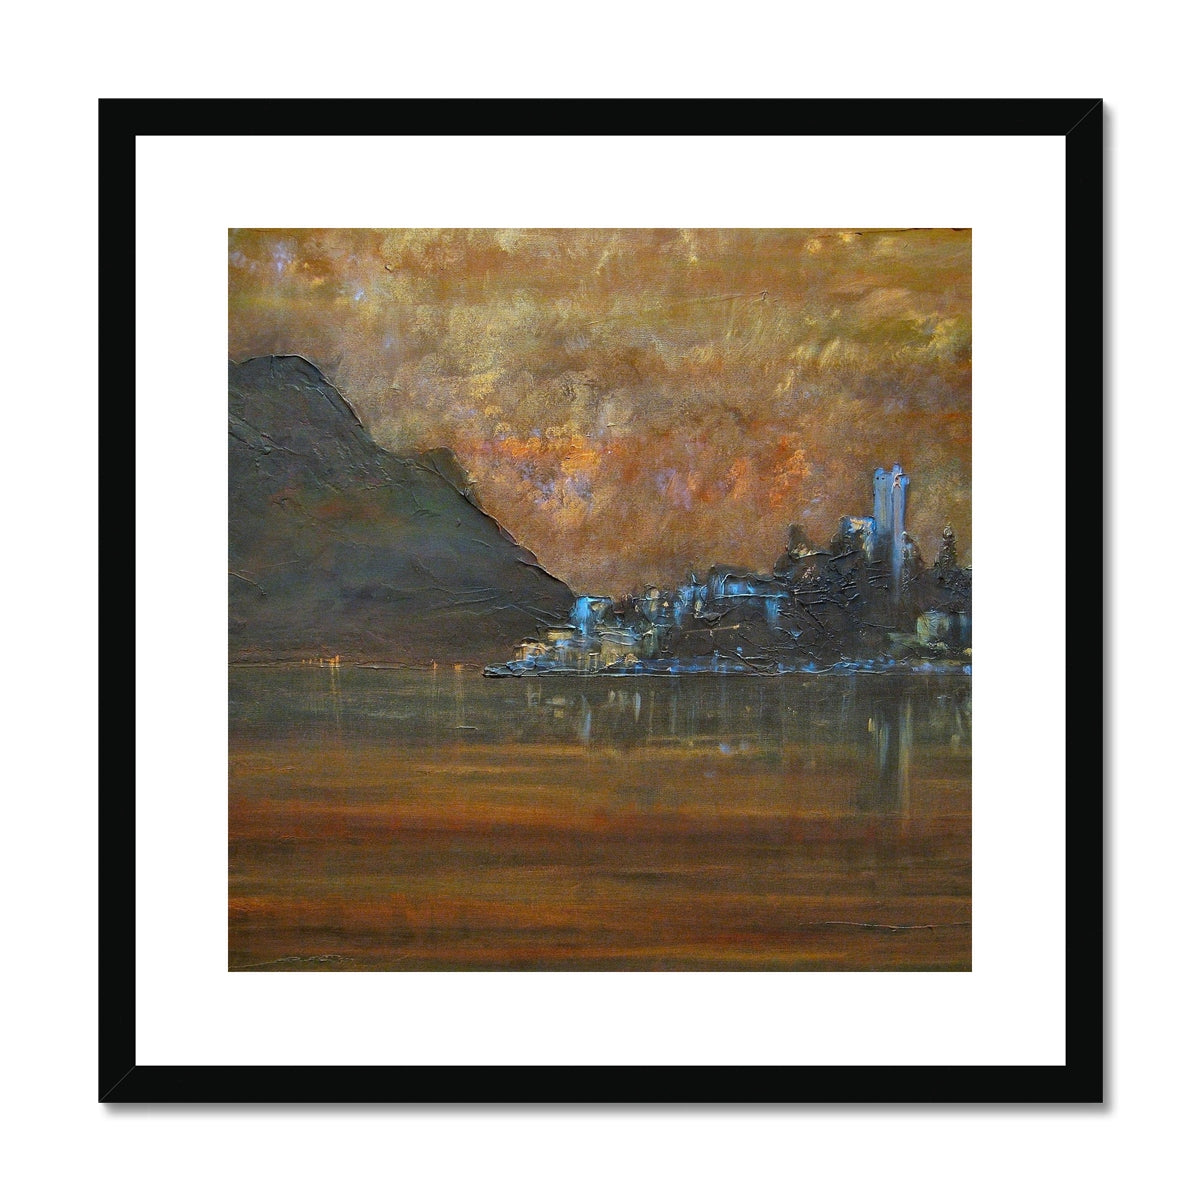 Lake Garda Dusk Italy Painting | Framed & Mounted Prints From Scotland-Framed & Mounted Prints-World Art Gallery-20"x20"-Black Frame-Paintings, Prints, Homeware, Art Gifts From Scotland By Scottish Artist Kevin Hunter